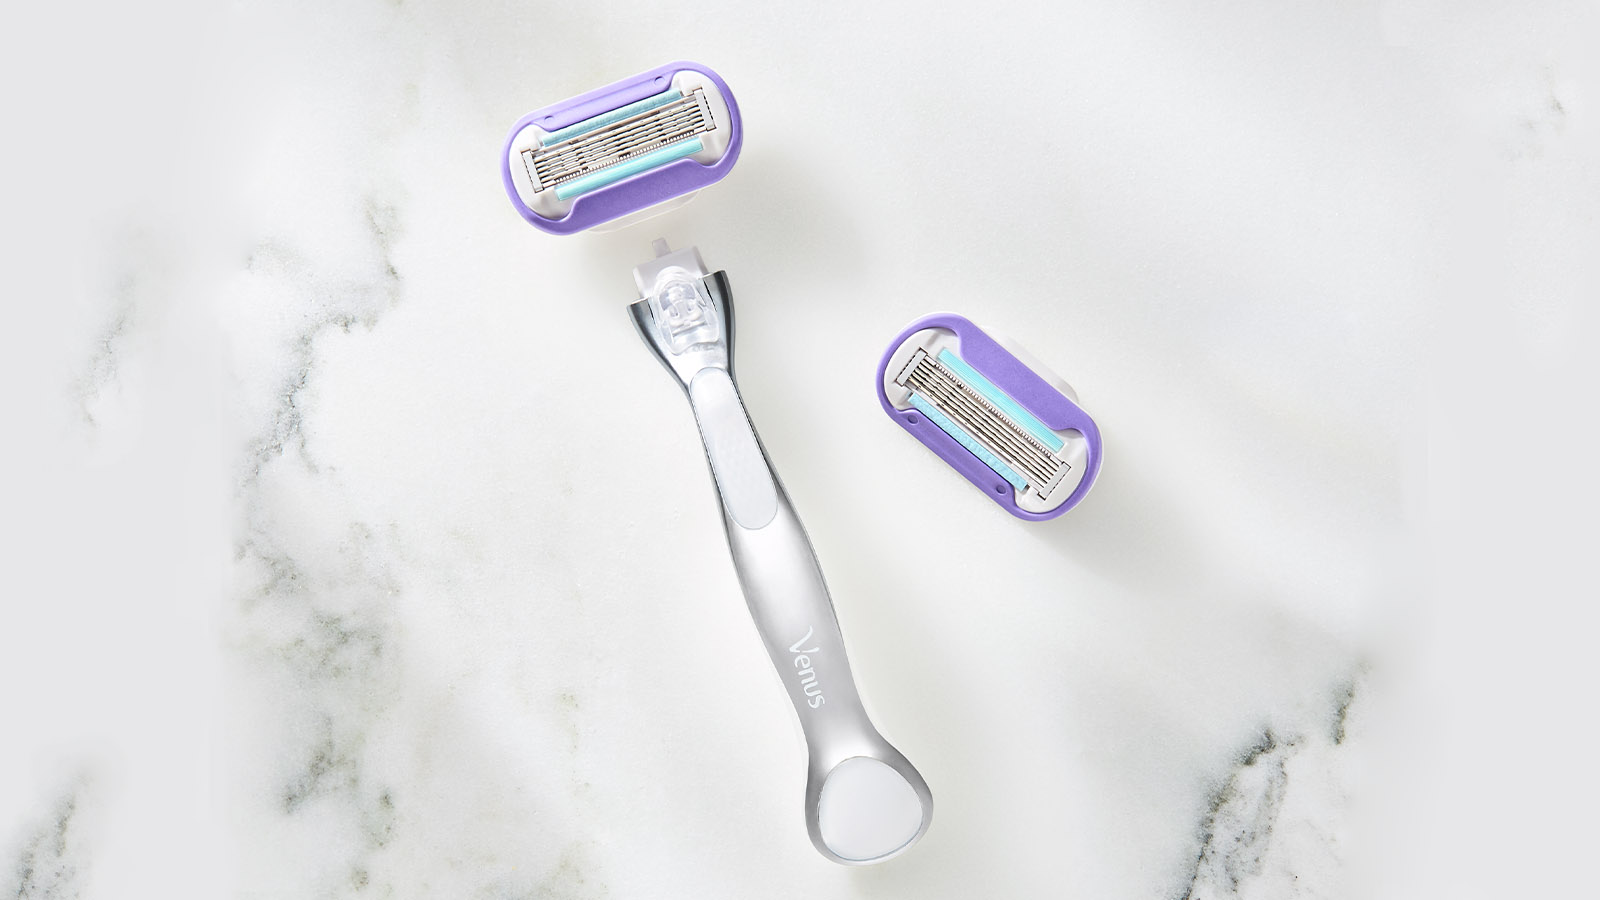 Deluxe Smooth Platinum razor and refill.